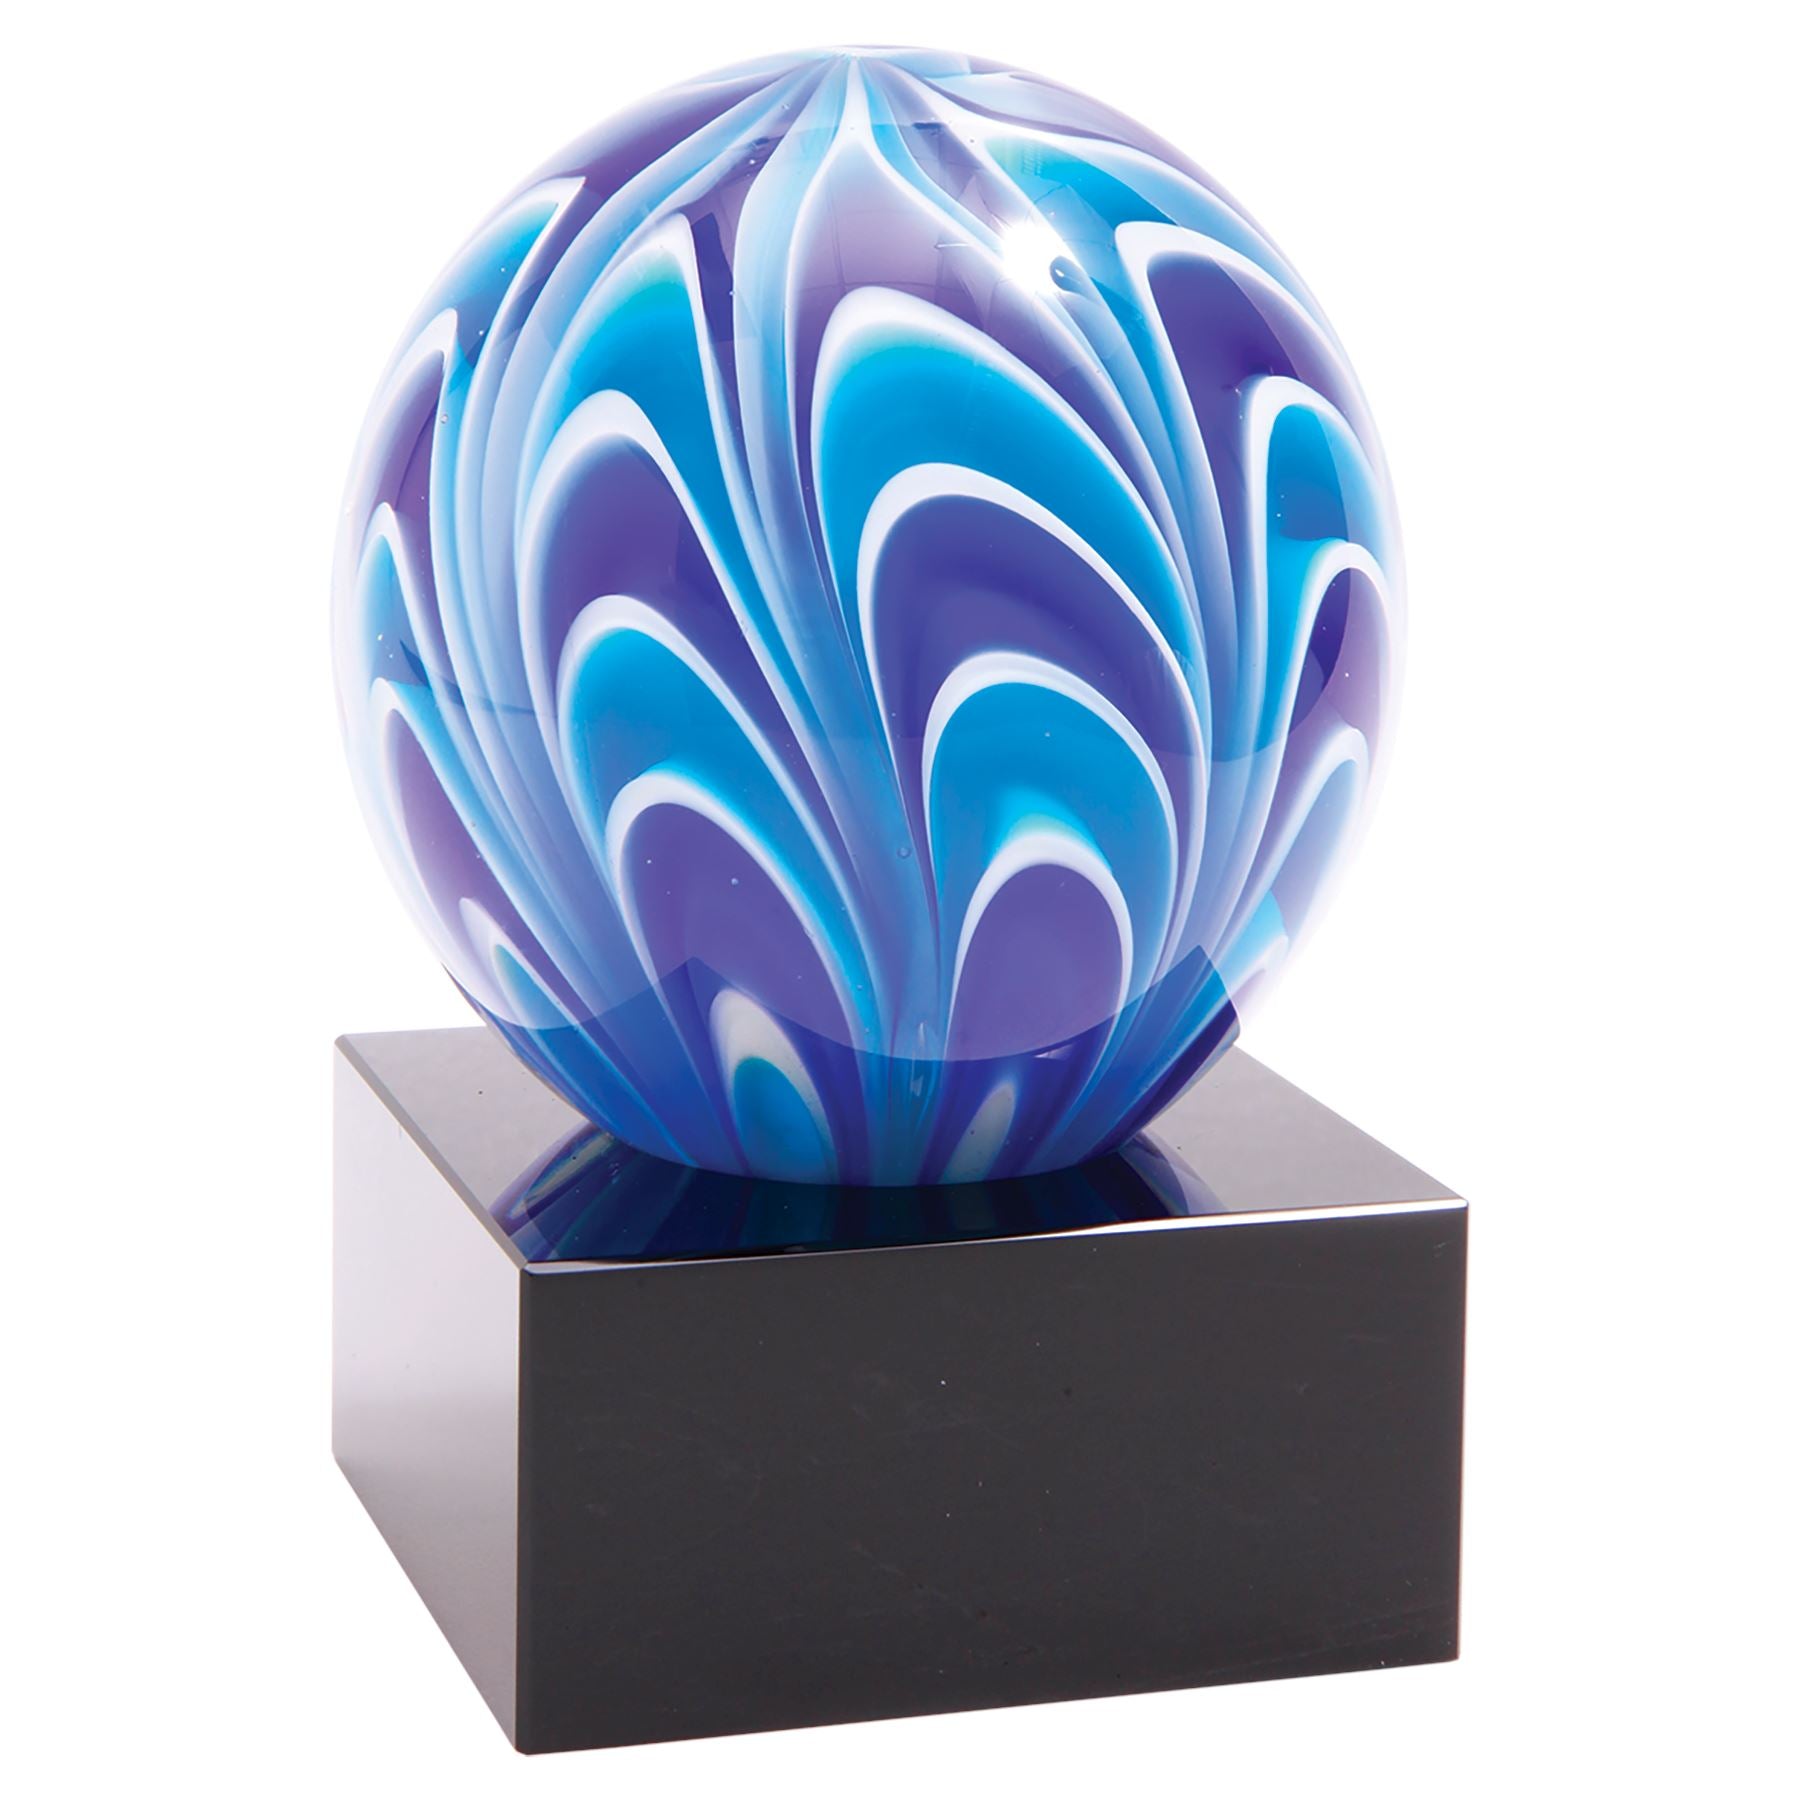 Two-Tone Blue & White Sphere, 5" Art Glass Award, Laser Engraved Art Glass Craftworks NW 